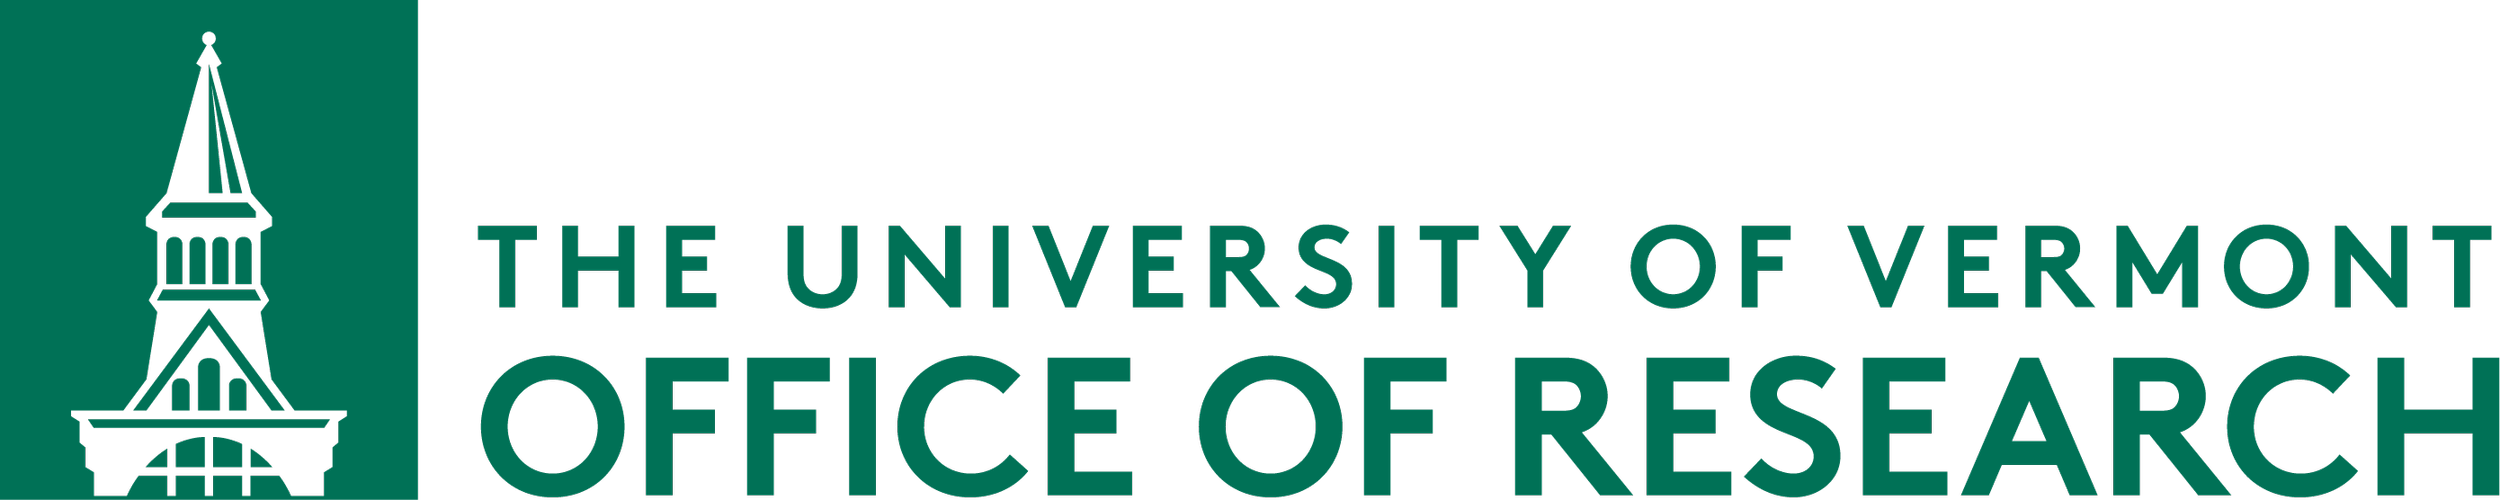 UVM Office of Research Logo Green Horizontal.png